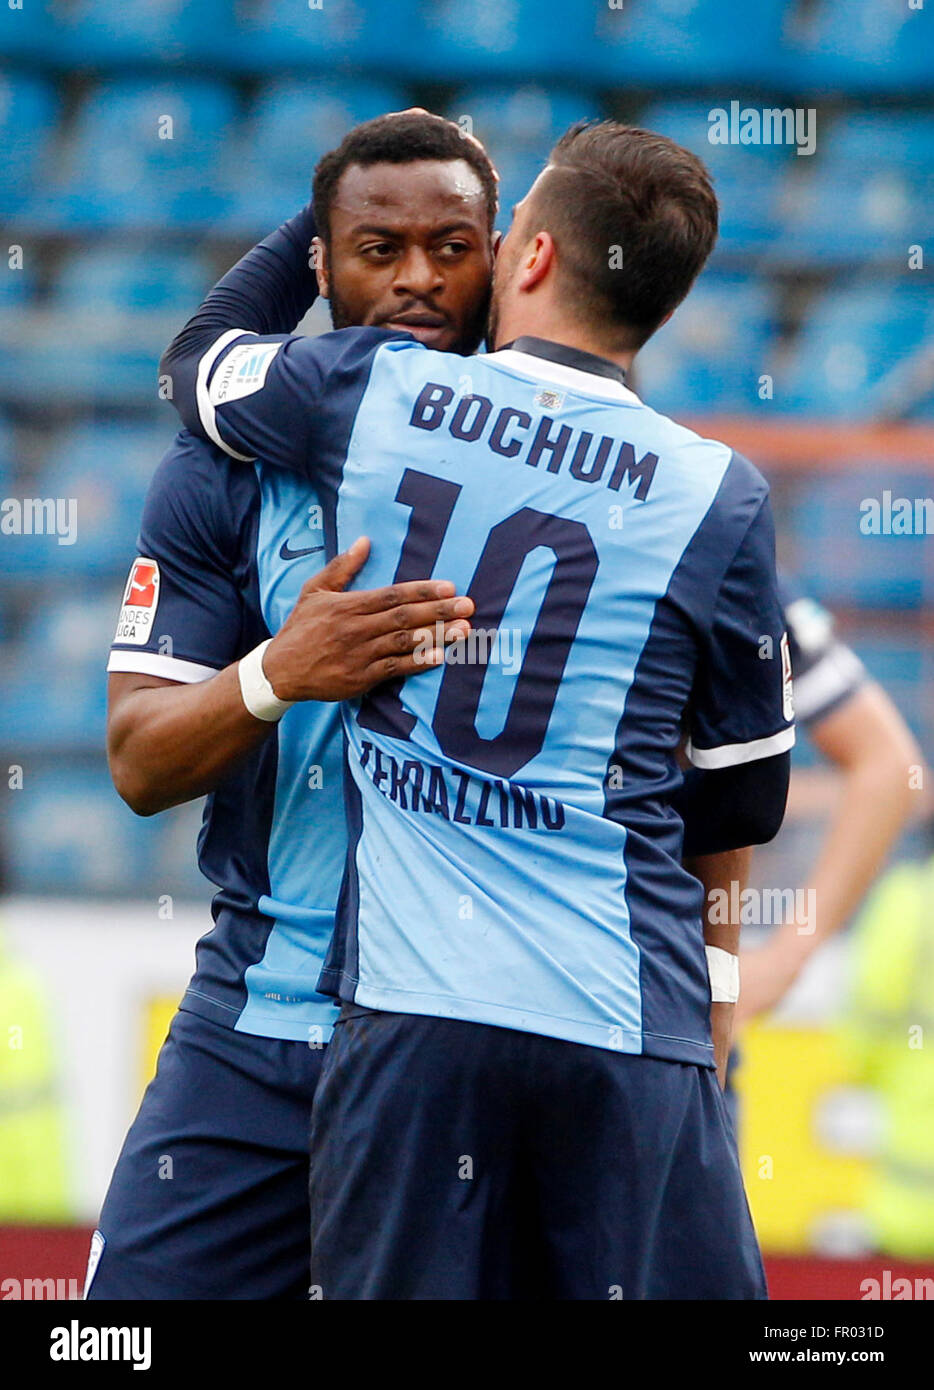 Bochum, Germany. 20th Mar, 2016. Bochum's Nando Rafael (L) celebrates his 2-2 goal with teammate Marco Terrazzino during the German second division Bundesliga soccer match between VfL Bochum and SpVgg Greuther Fuerth at rewirpowerSTADION in Bochum, Germany, 20 March 2016. Photo: ROLAND WEIHRAUCH/dpa/Alamy Live News Stock Photo